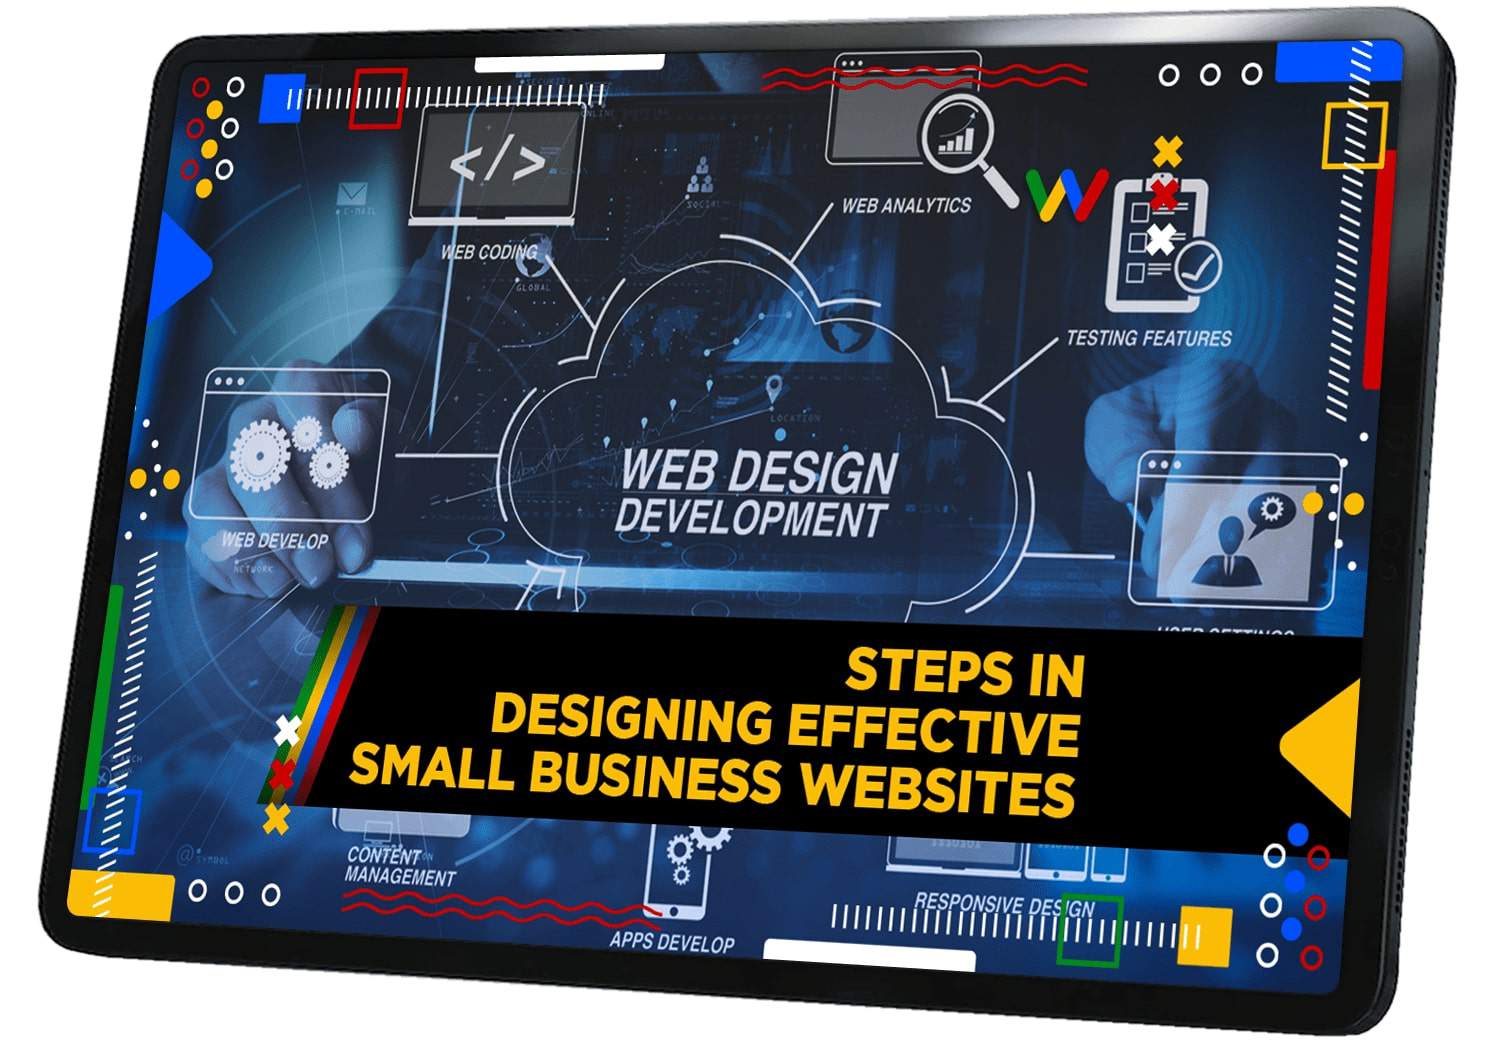 Steps in Designing Effective Small Business Websites